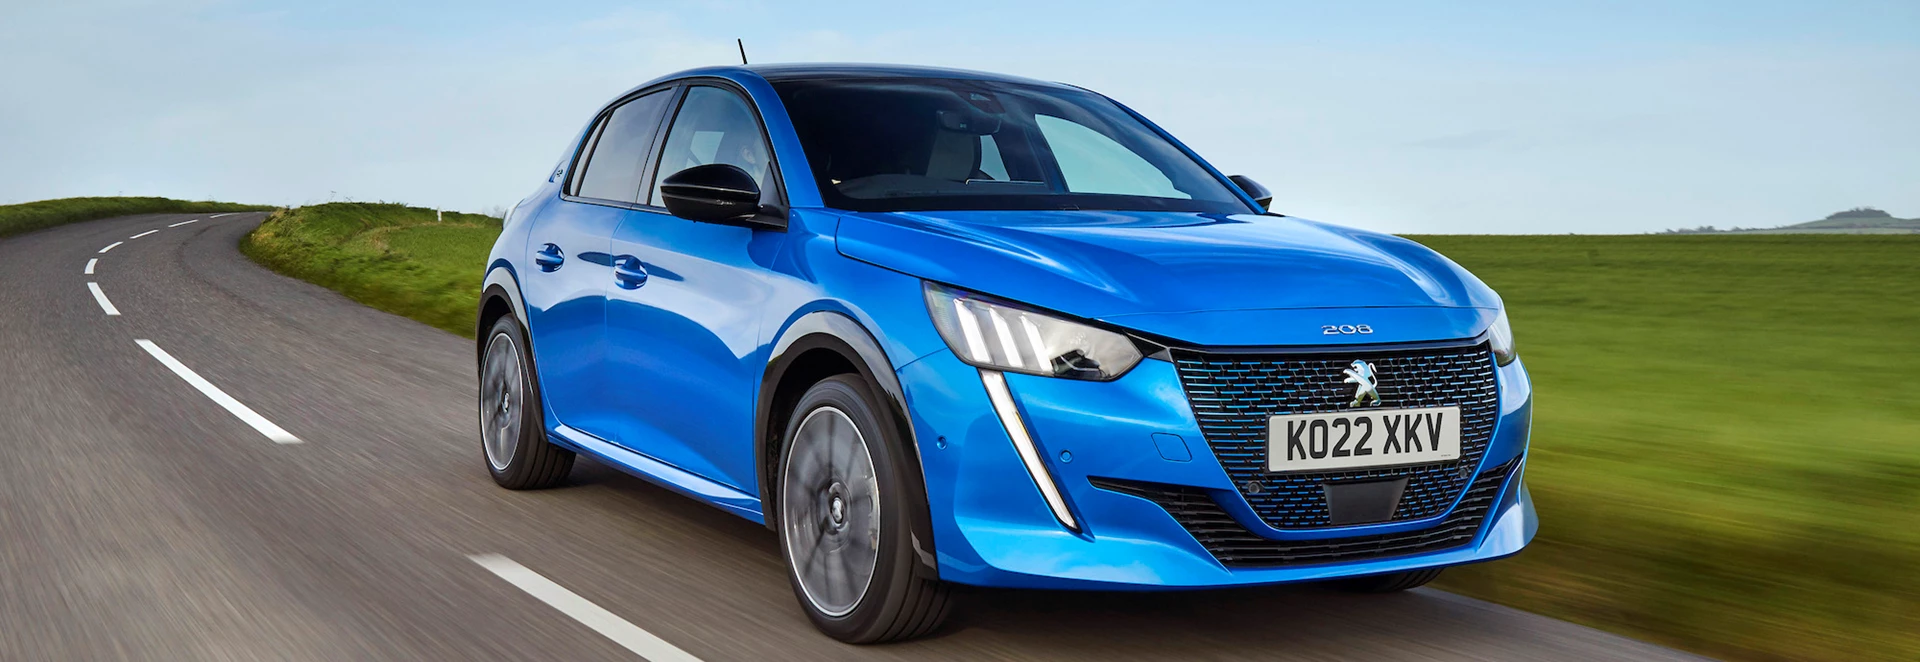 Buyer’s guide to the 2023 Peugeot 208 